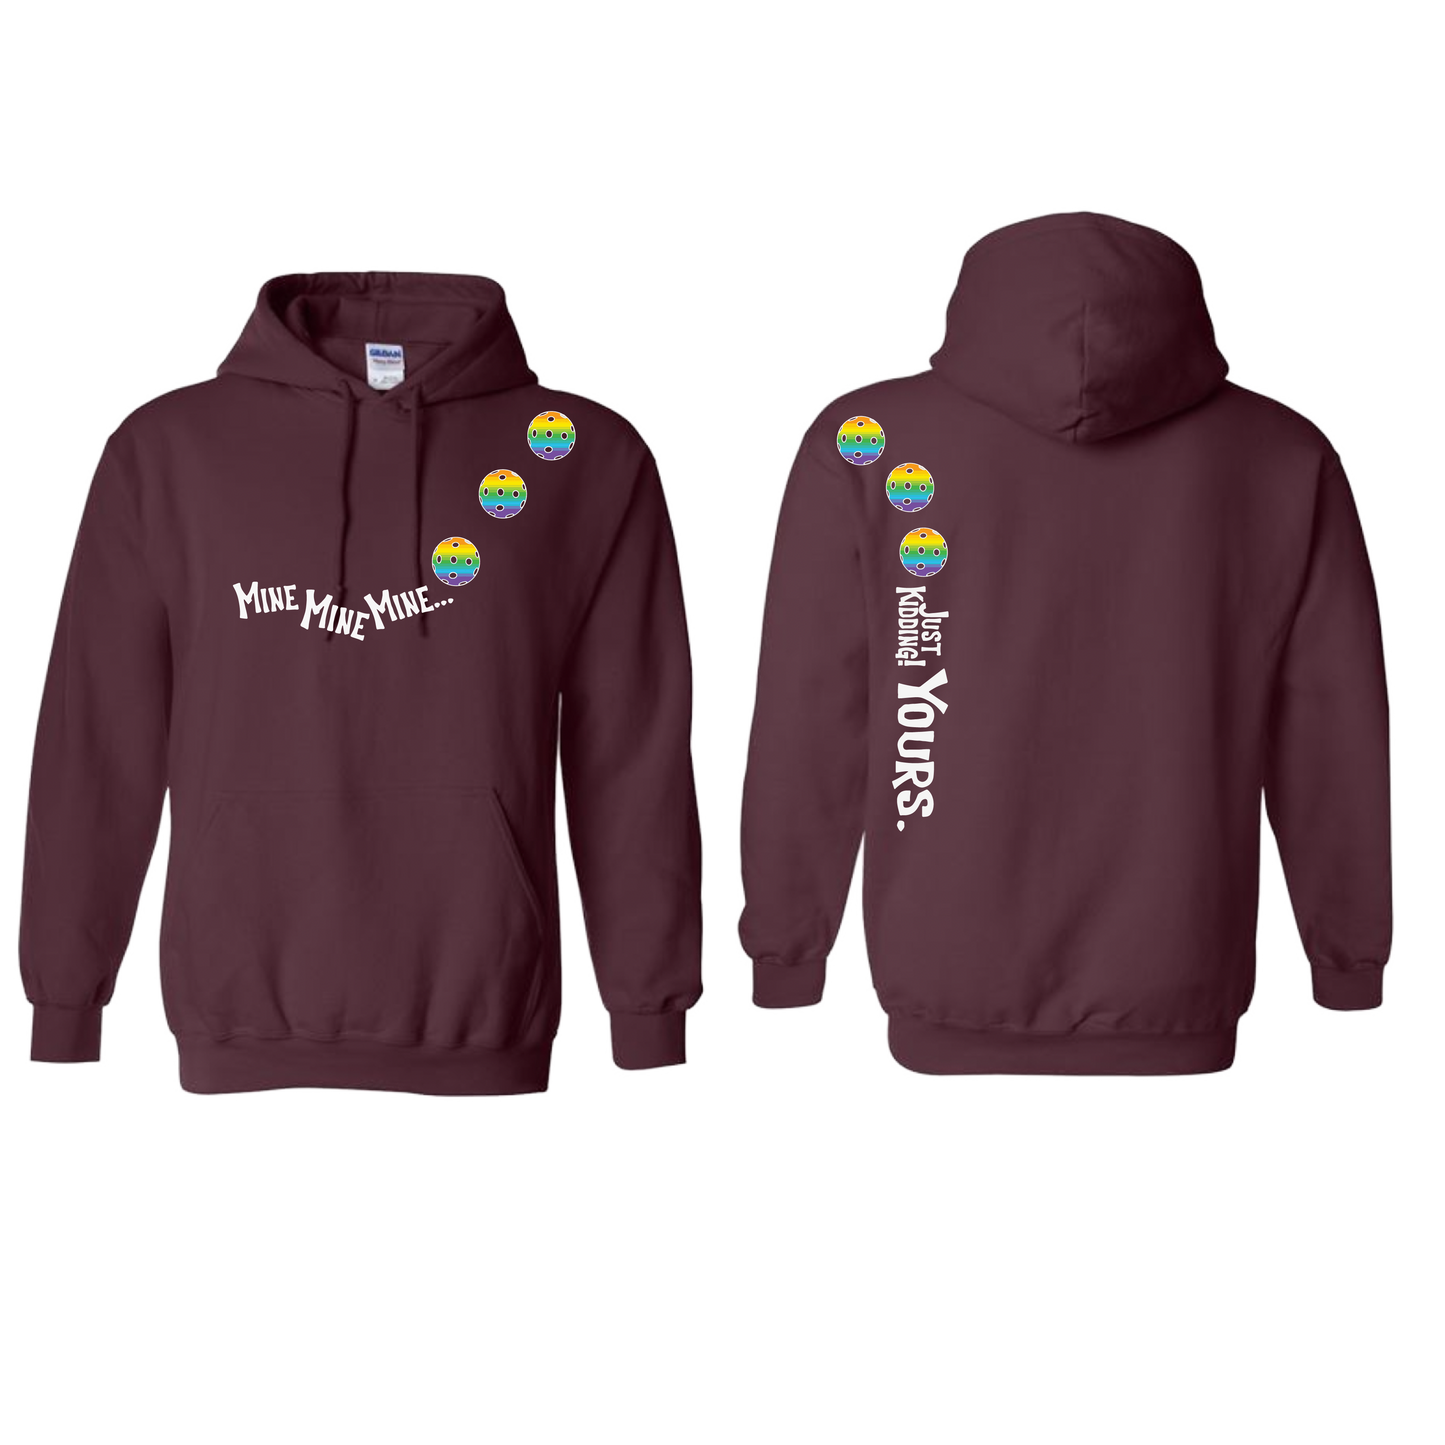 Mine JK Yours (Pickleball Colors Green Rainbow or Cyan) | Unisex Hoodie Athletic Sweatshirt | 50% Cotton/50% Polyester